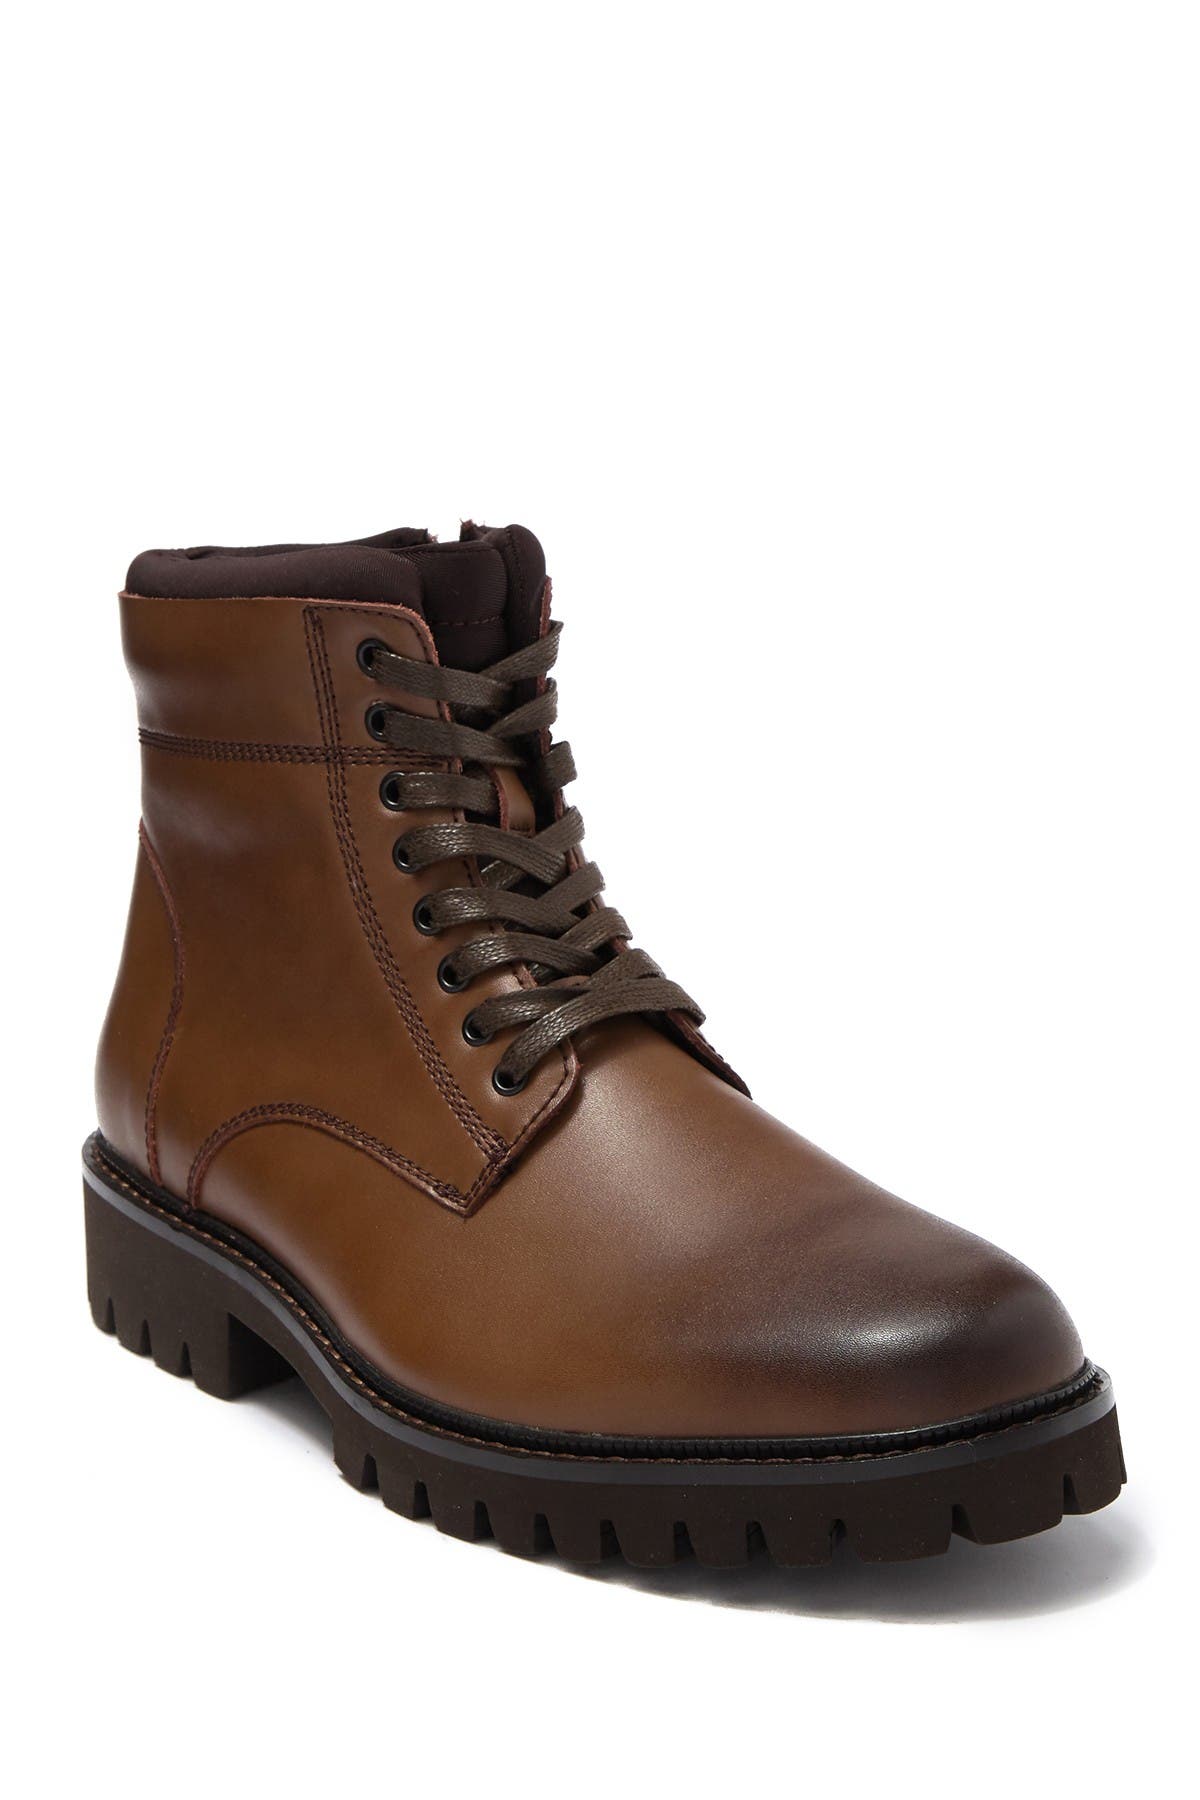 kenneth cole leather boots